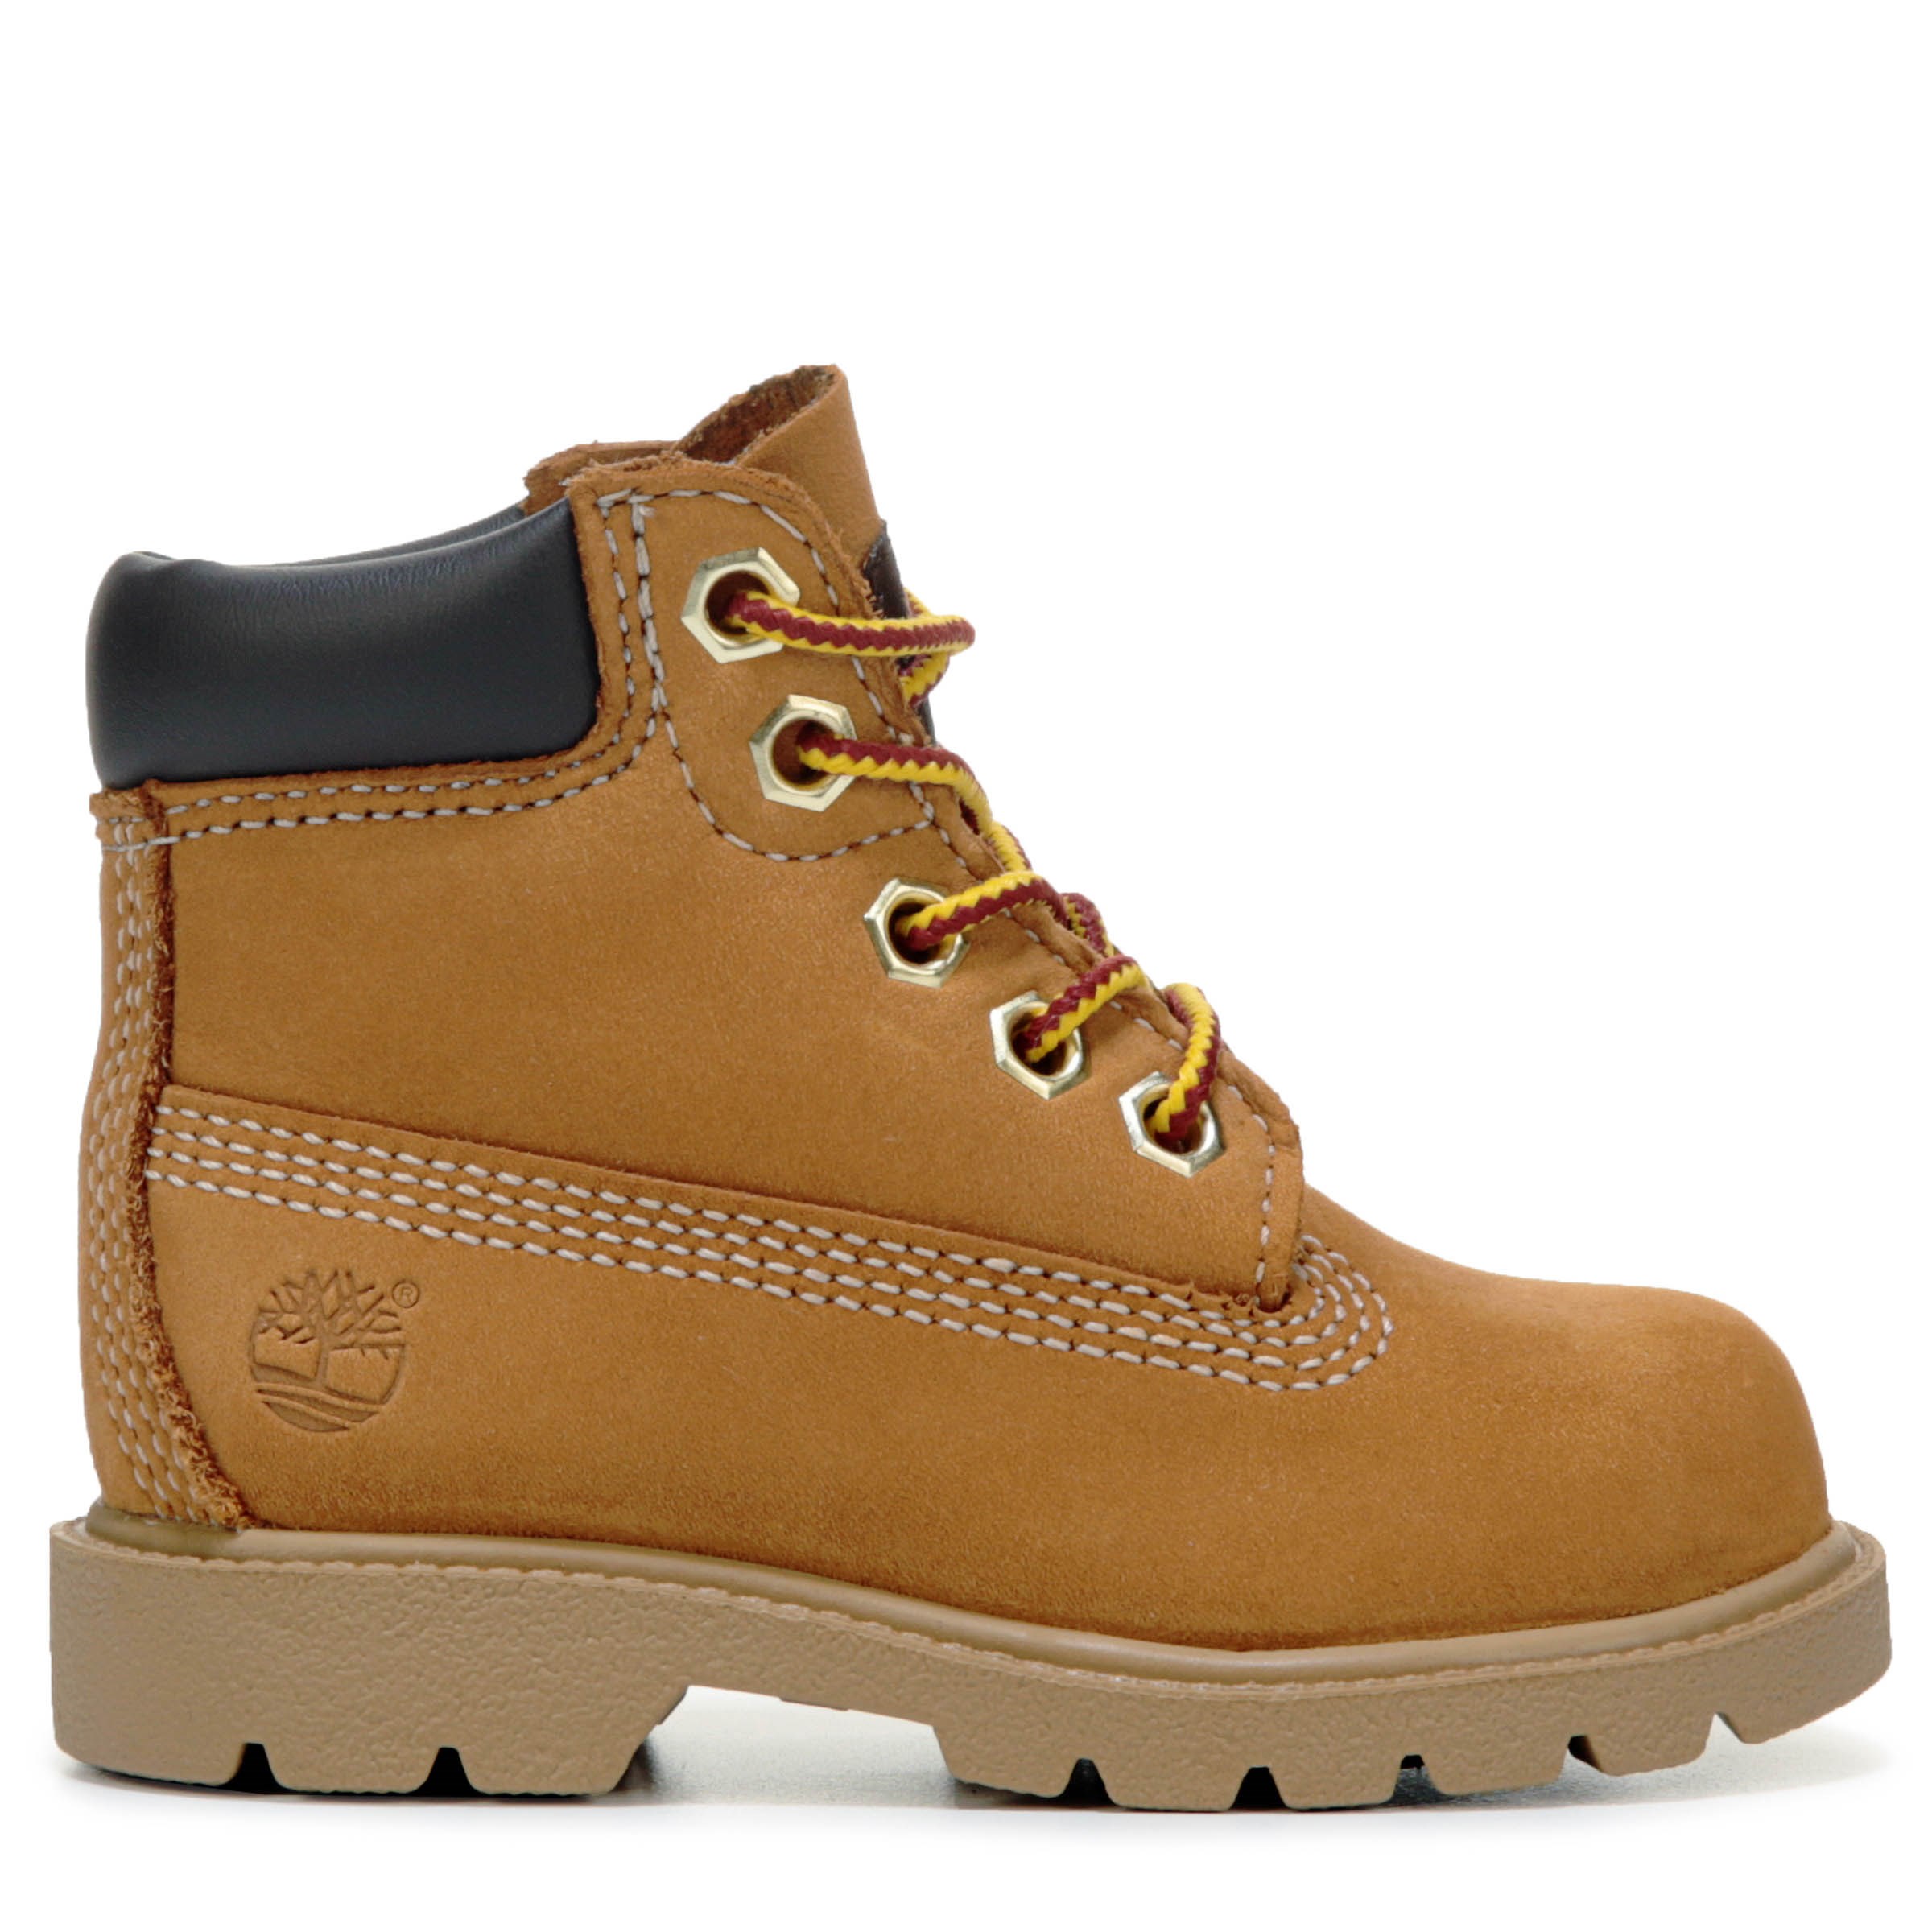 Timberland Kids' 6" Classic Toddler/Little Kid Famous Footwear